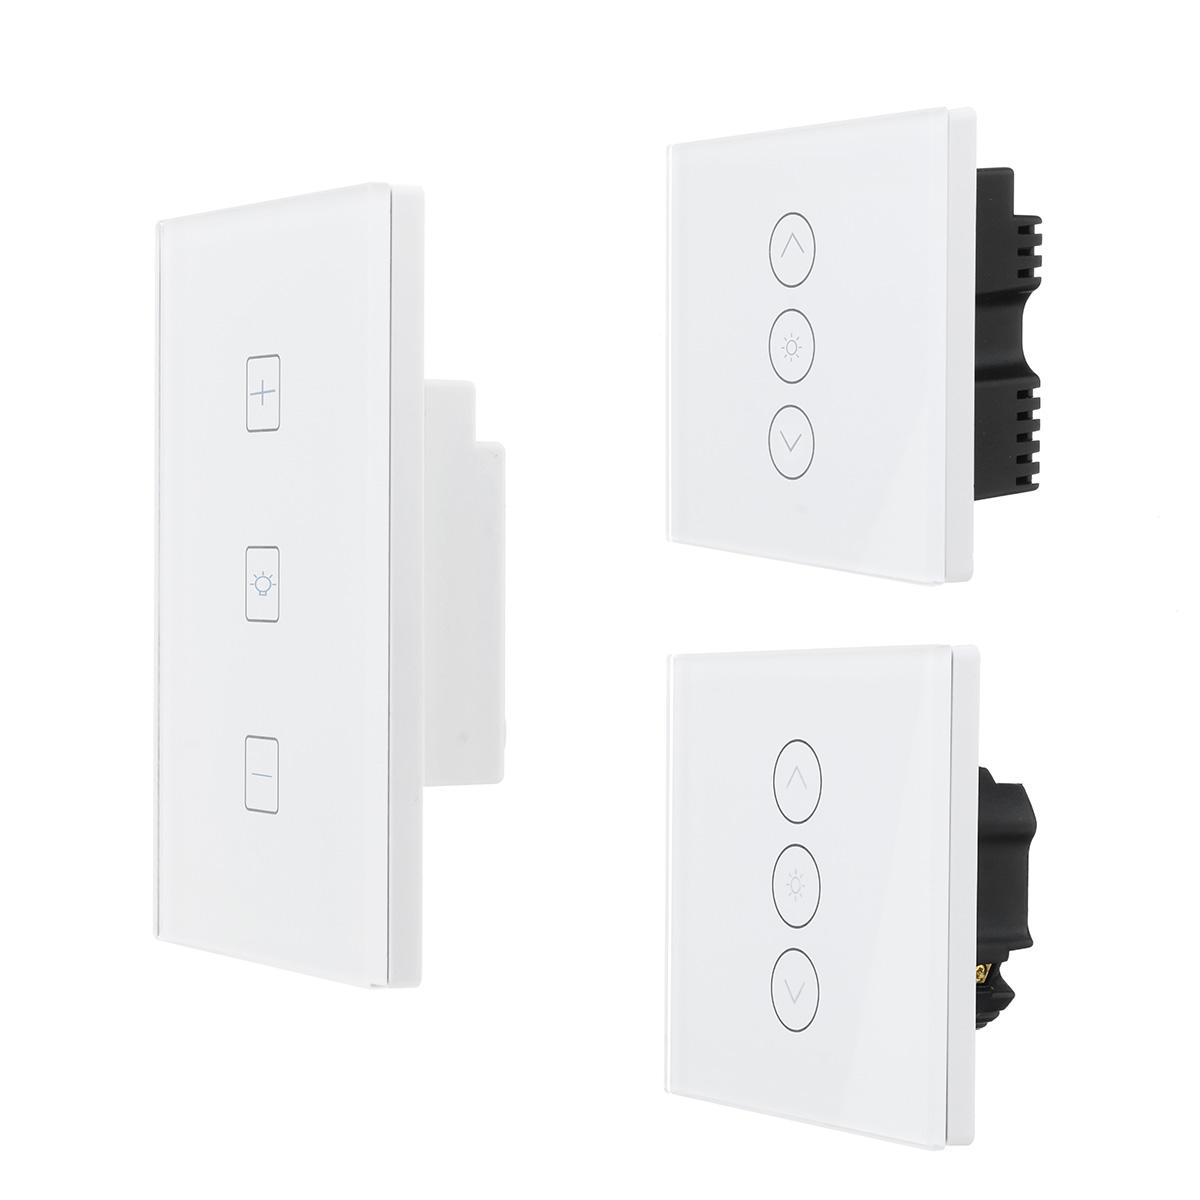 Image of WIFI Smart Dimmer Light Wall Switch Touch Remote Control Work with Alexa/Google Home